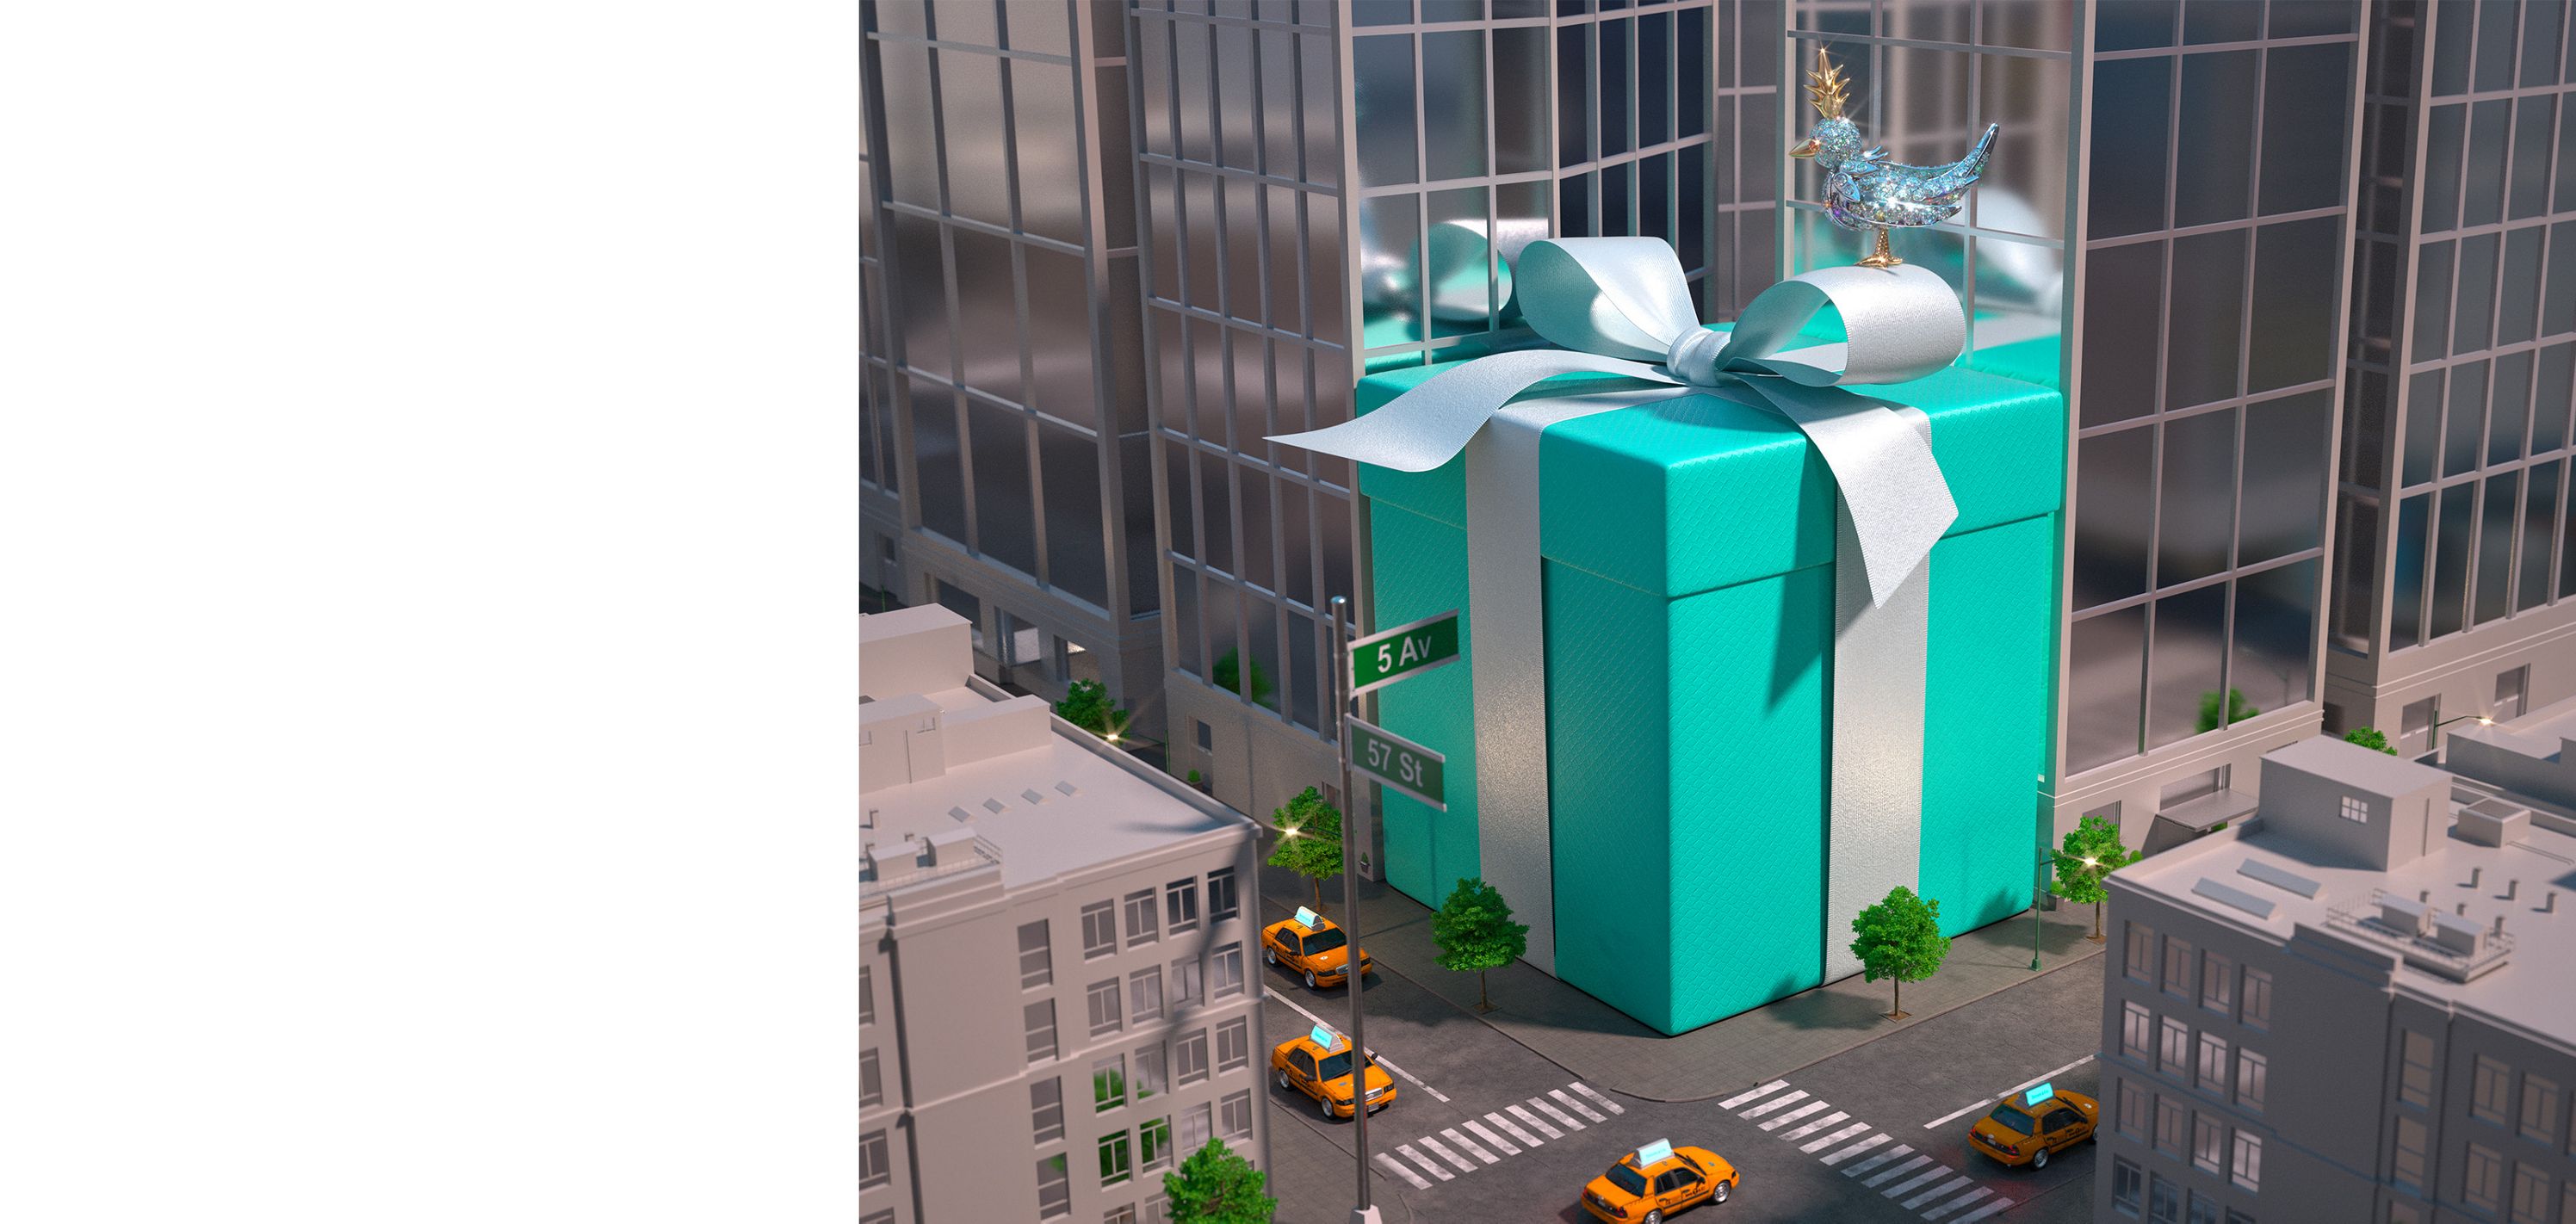 Founded In 1837 In New York City, Tiffany & Co - Tiffany And Co